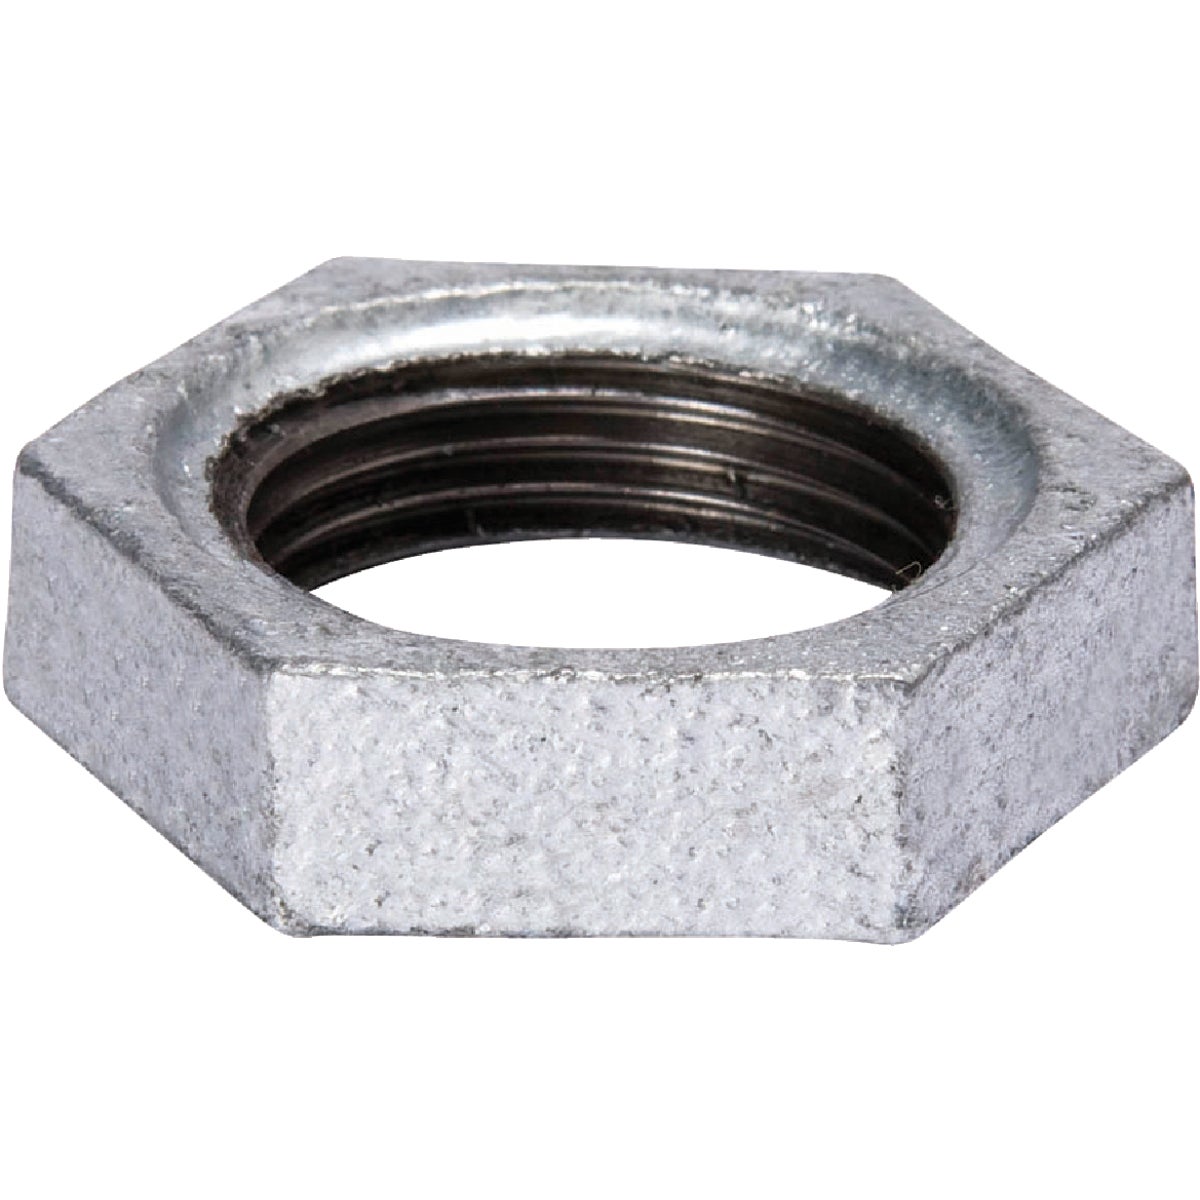 Southland 1 In. Malleable Iron Galvanized Lock Nut